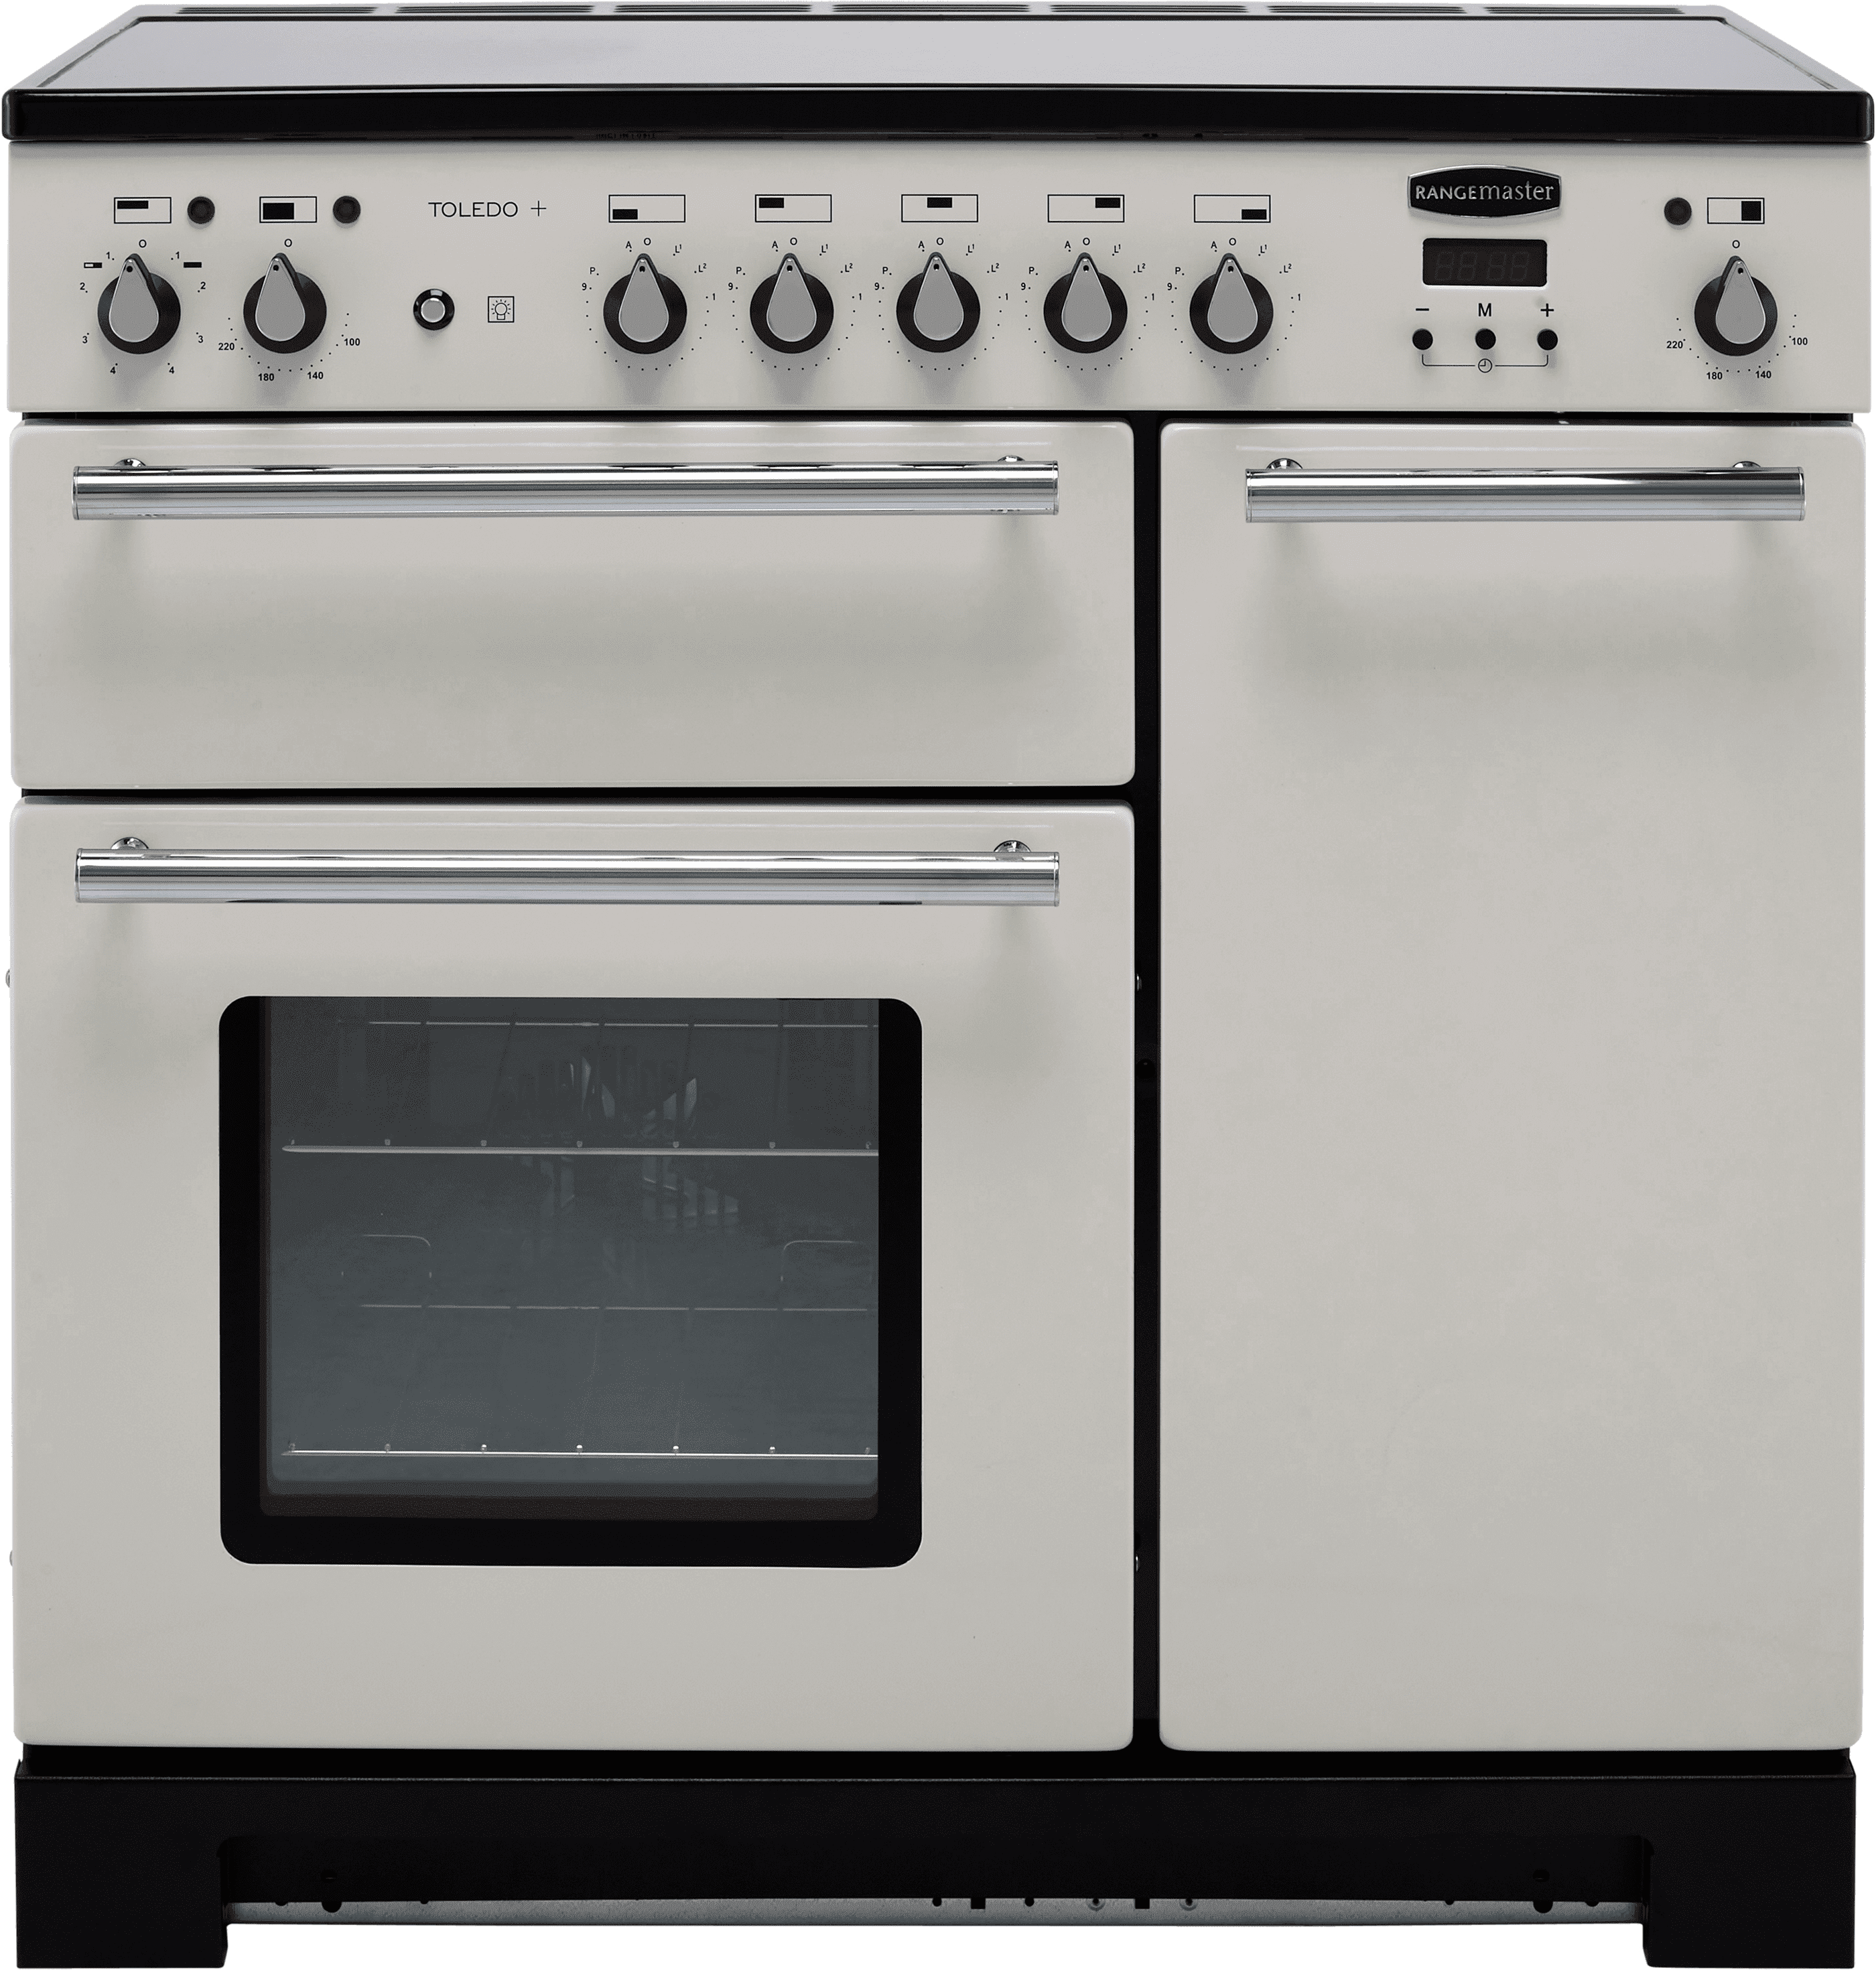 Rangemaster Toledo + TOLP90EIIV/C 90cm Electric Range Cooker with Induction Hob - Ivory / Chrome - A/A Rated, Cream